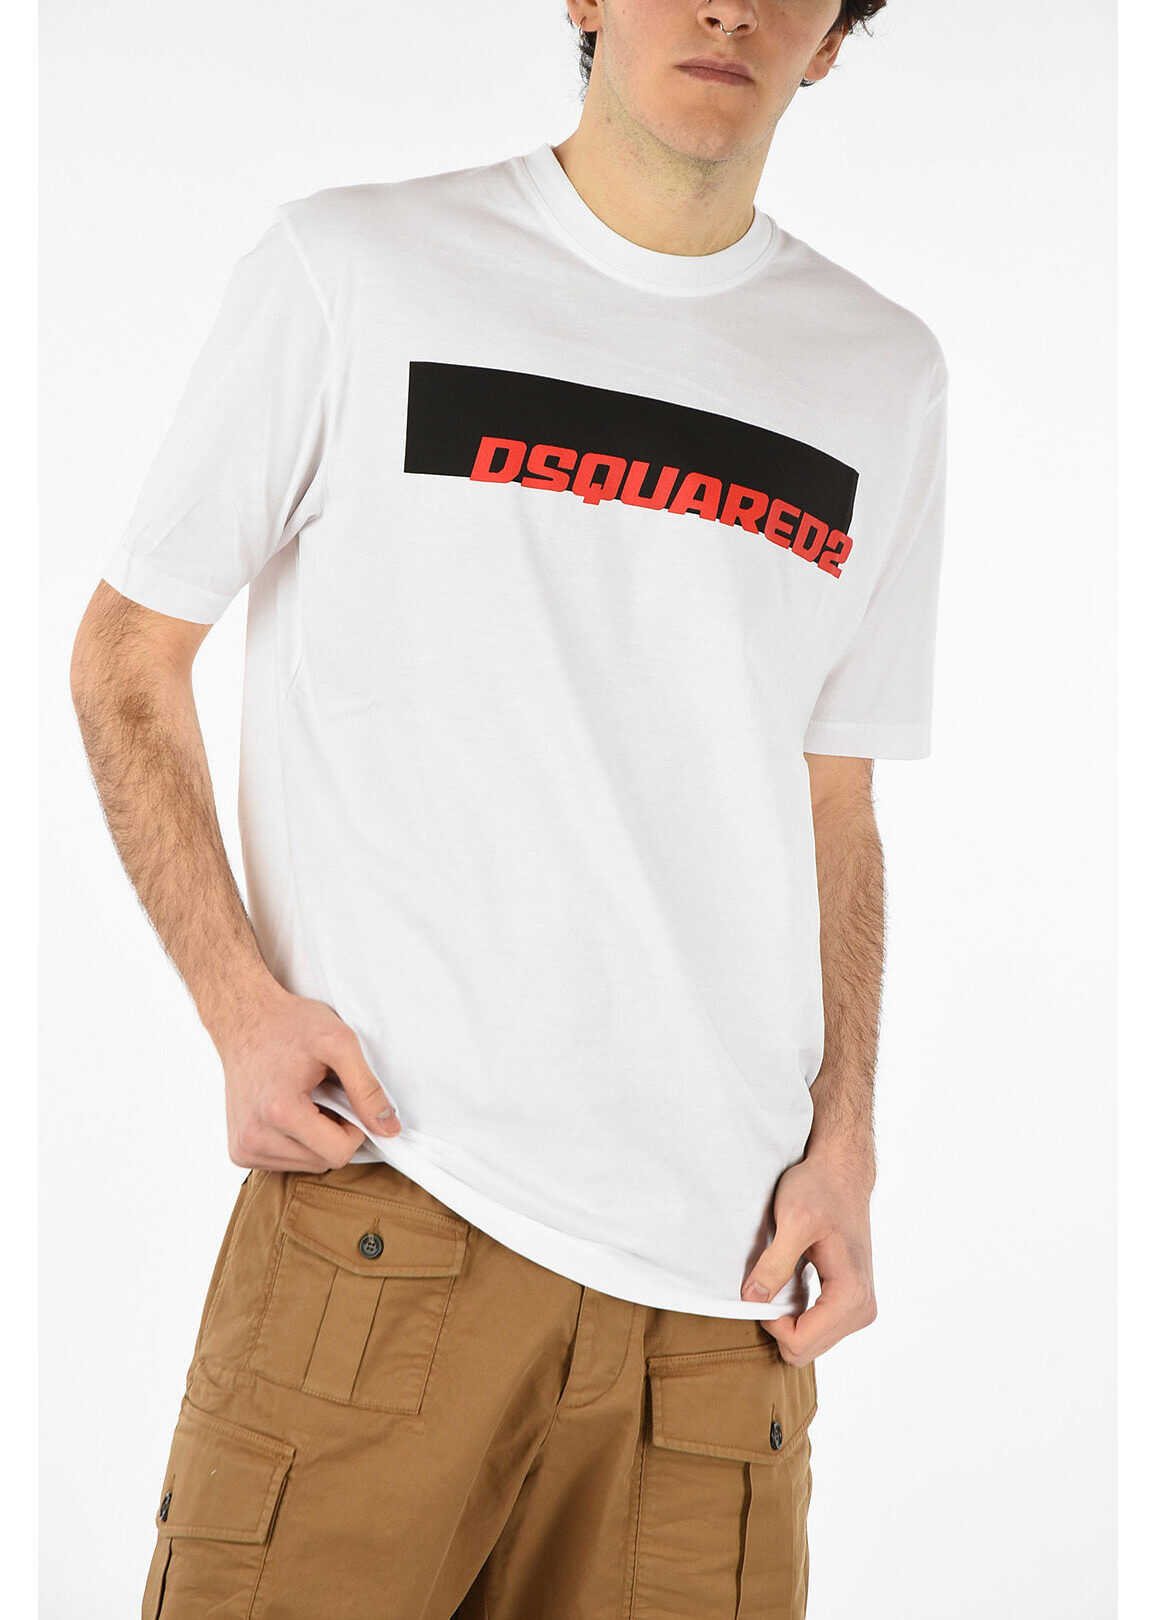 DSQUARED2 Crewneck T-shirt with Printed Logo WHITE